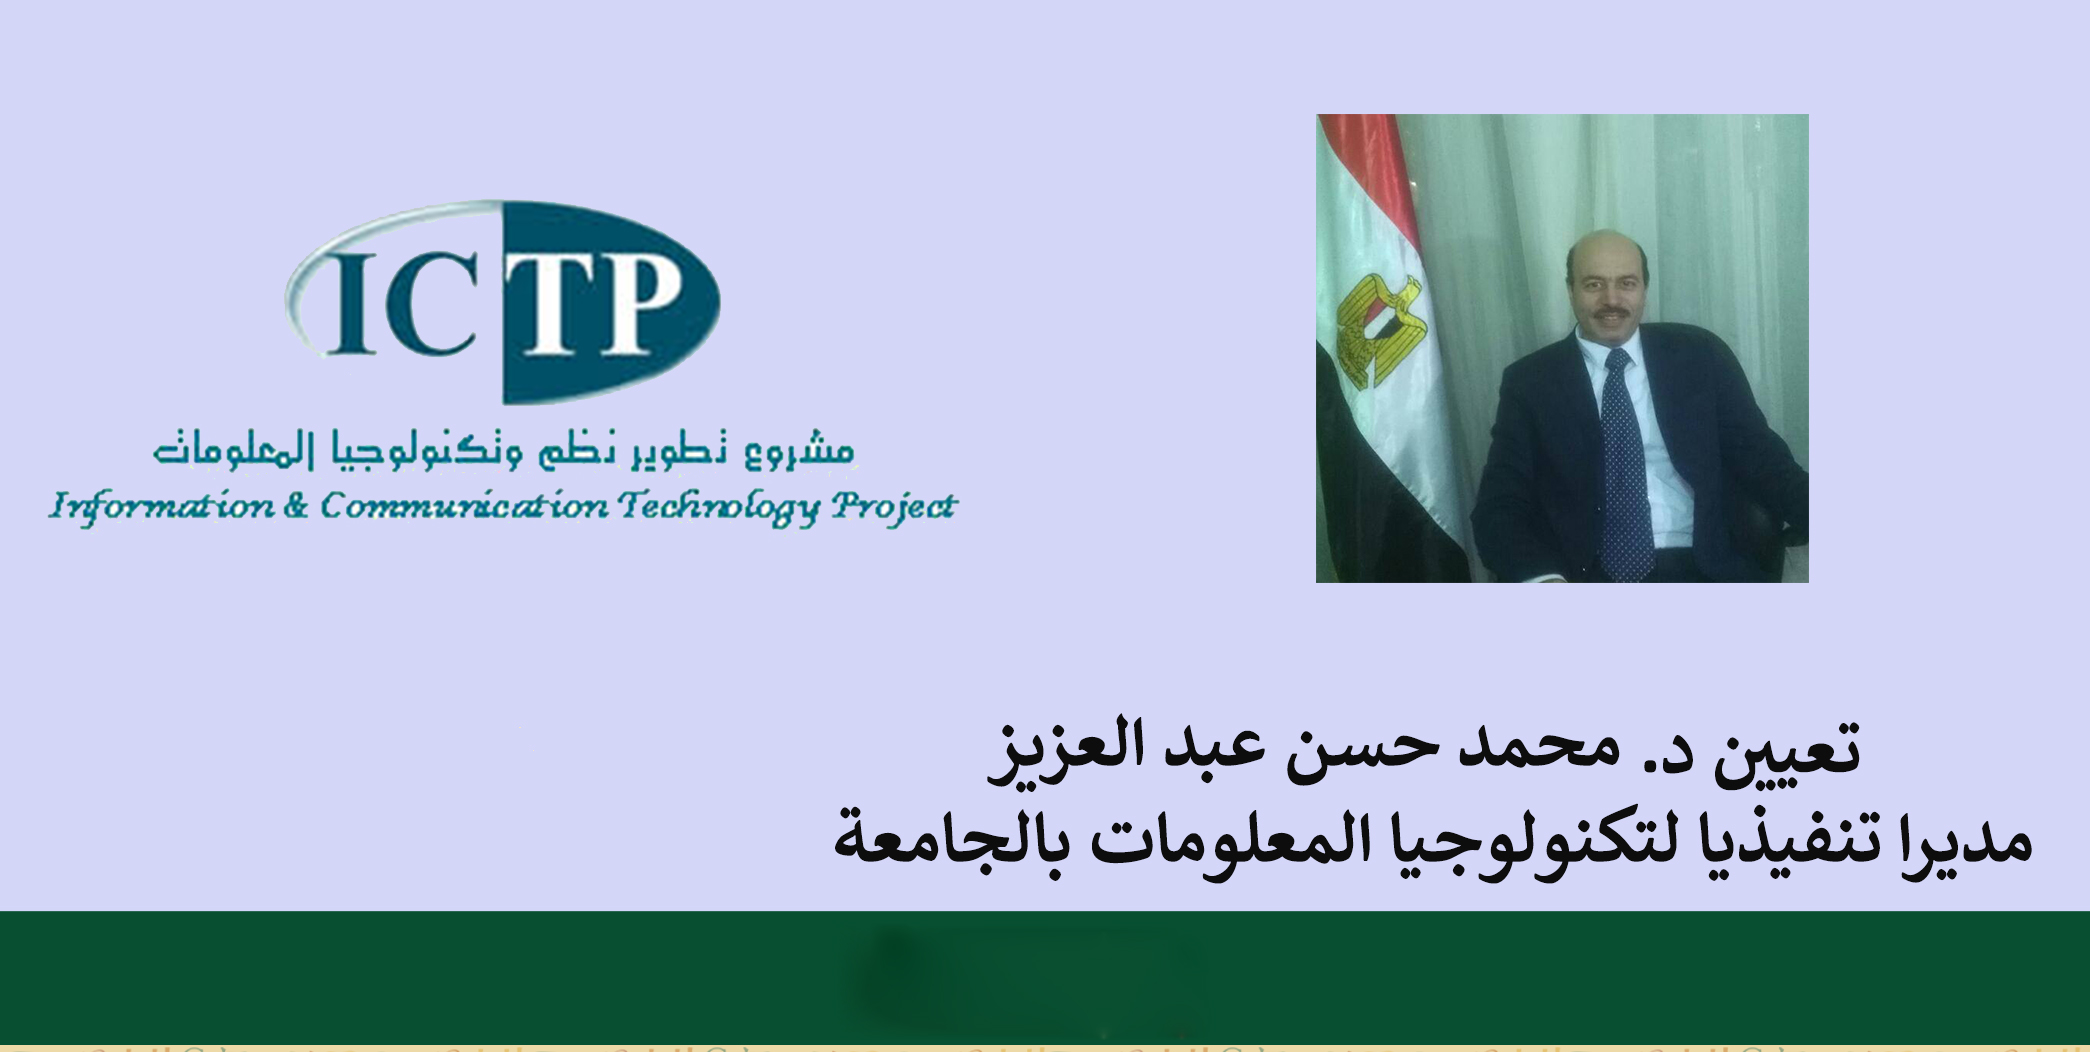 Appointment of Prof. Dr. Mohamed Hassan Abdul Aziz as the Executive Director of Information Technology University